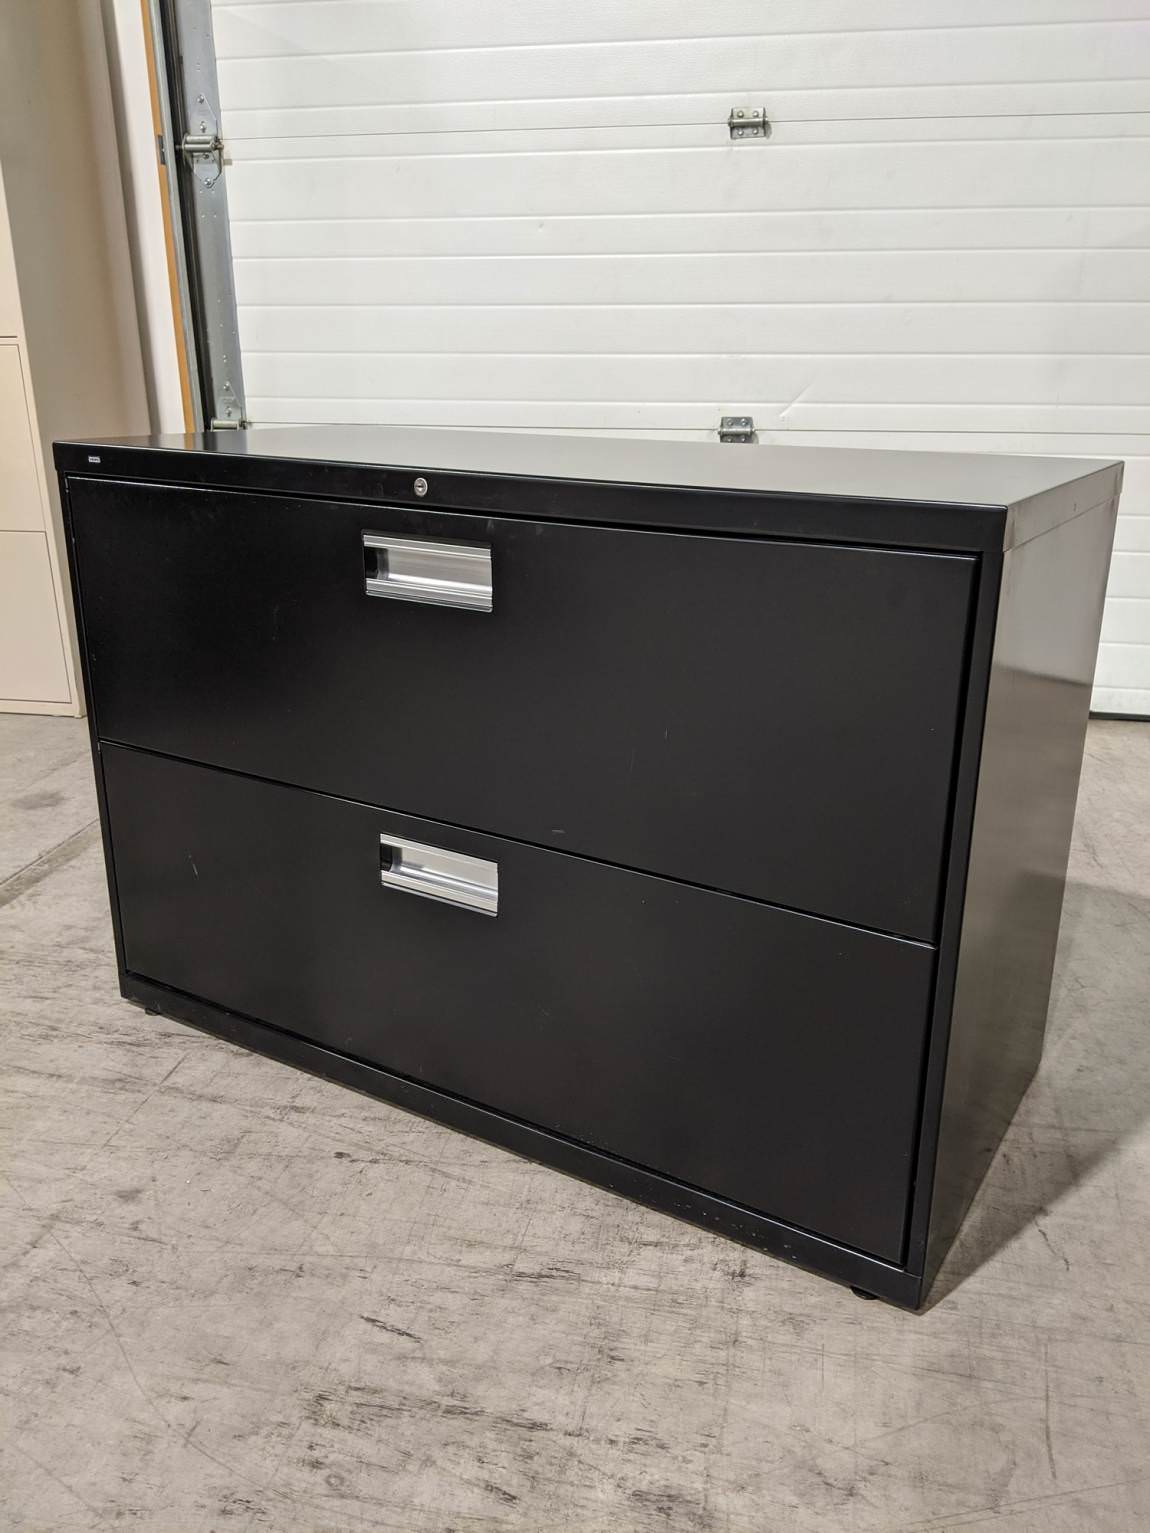 Black Hon 2 Drawer Lateral Filing Cabinet – 42 Inch Wide